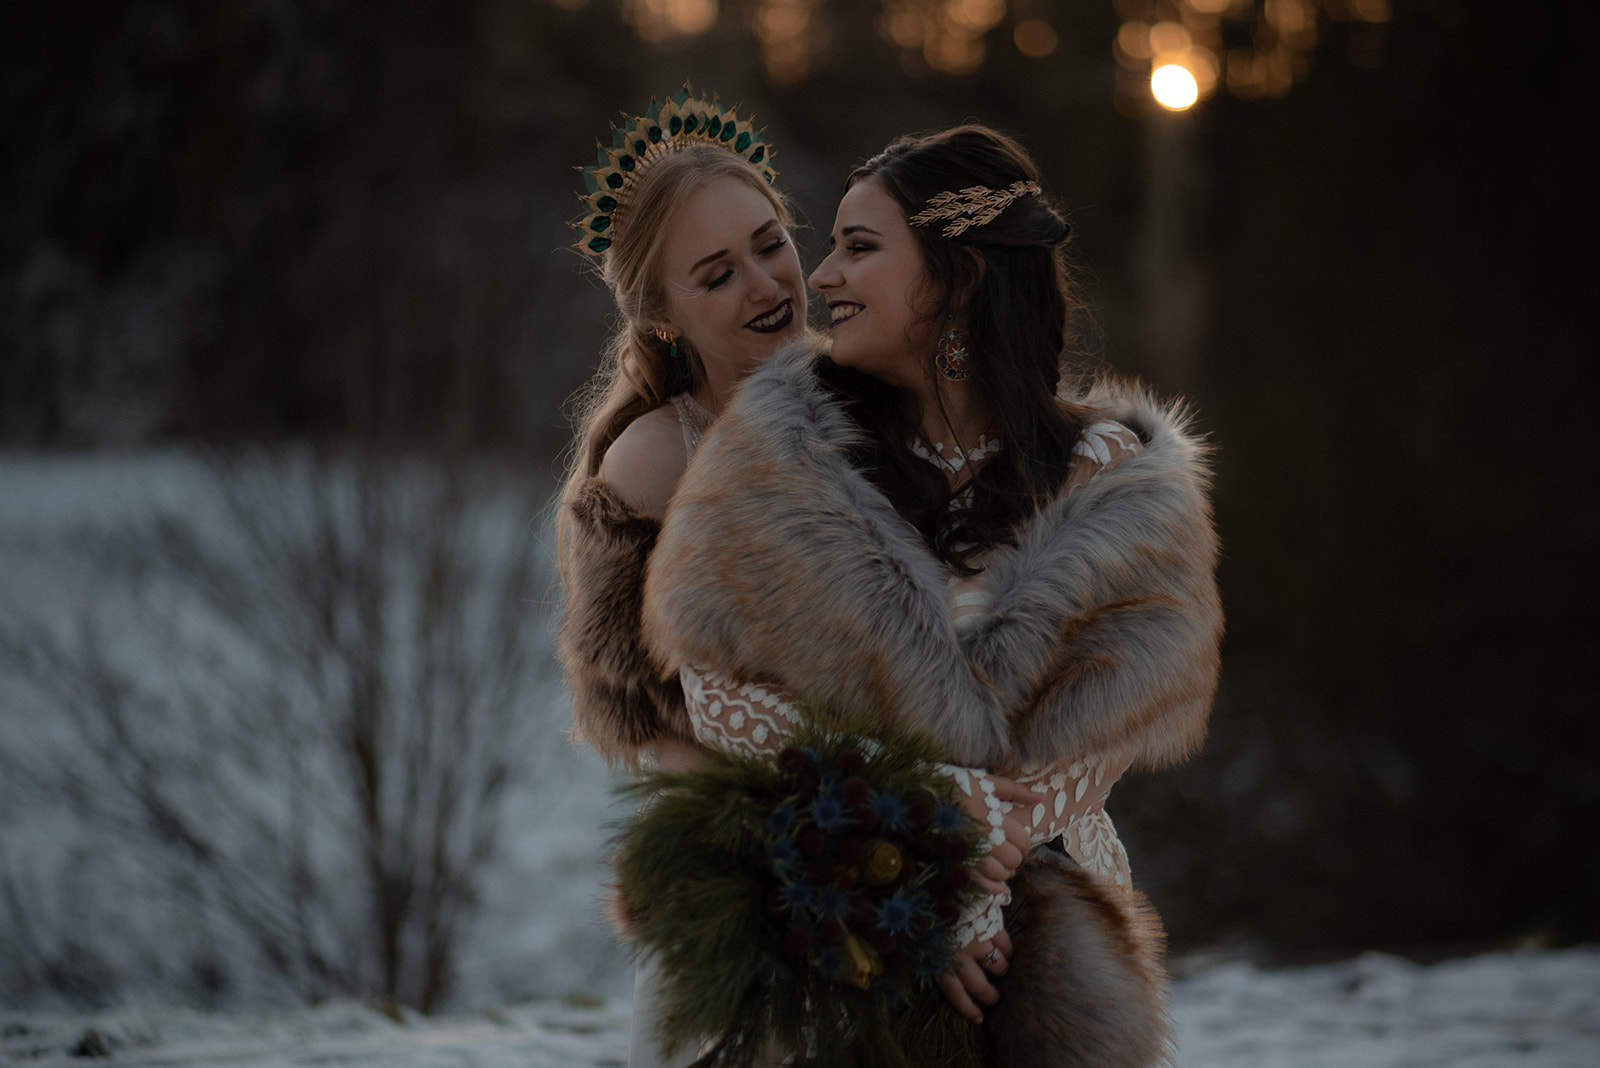 two women hugging each other in winter background